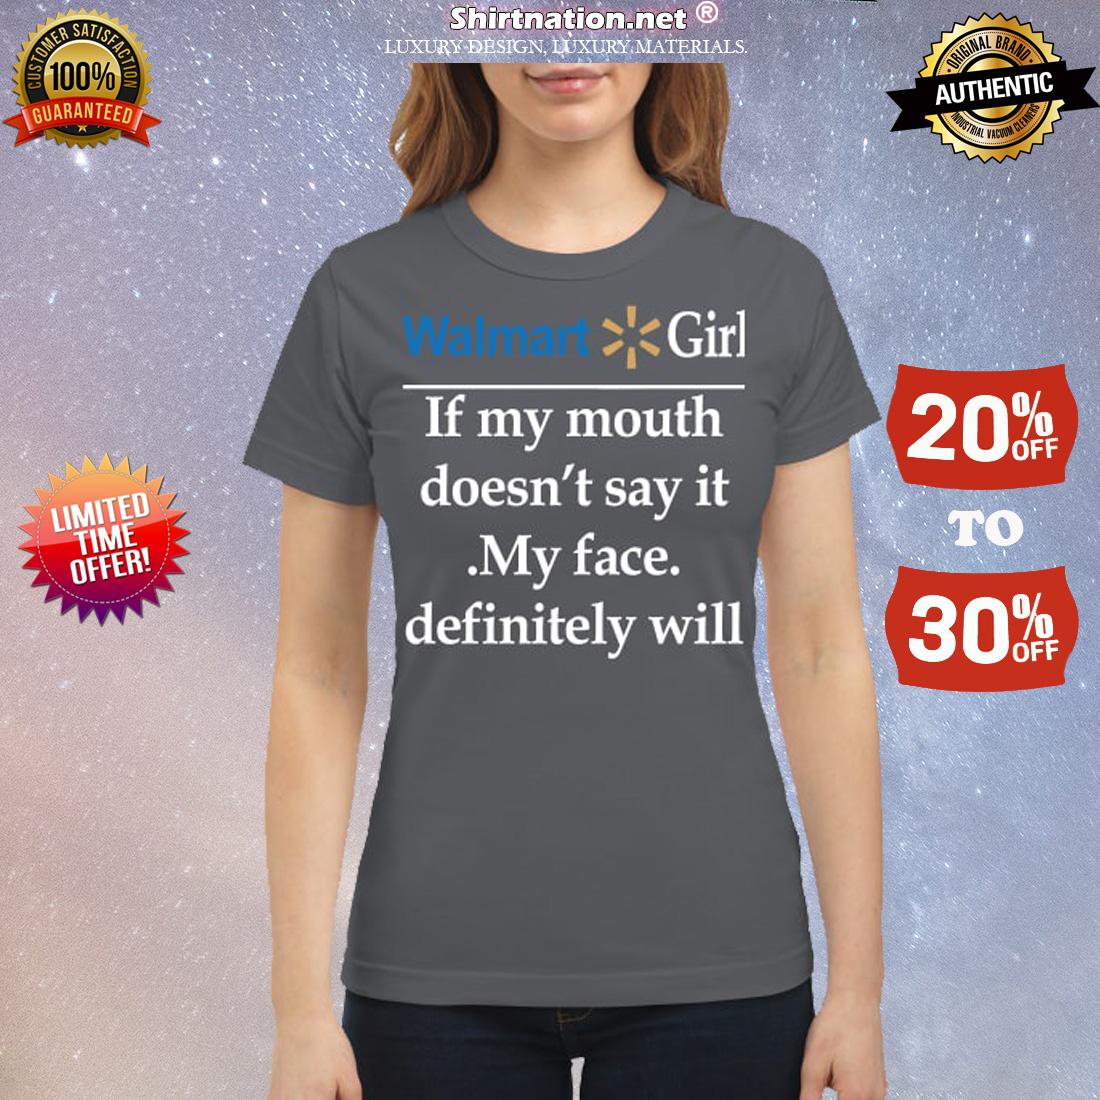 Walmart girl if my mouth doesn't say it my face definitely will classic shirt